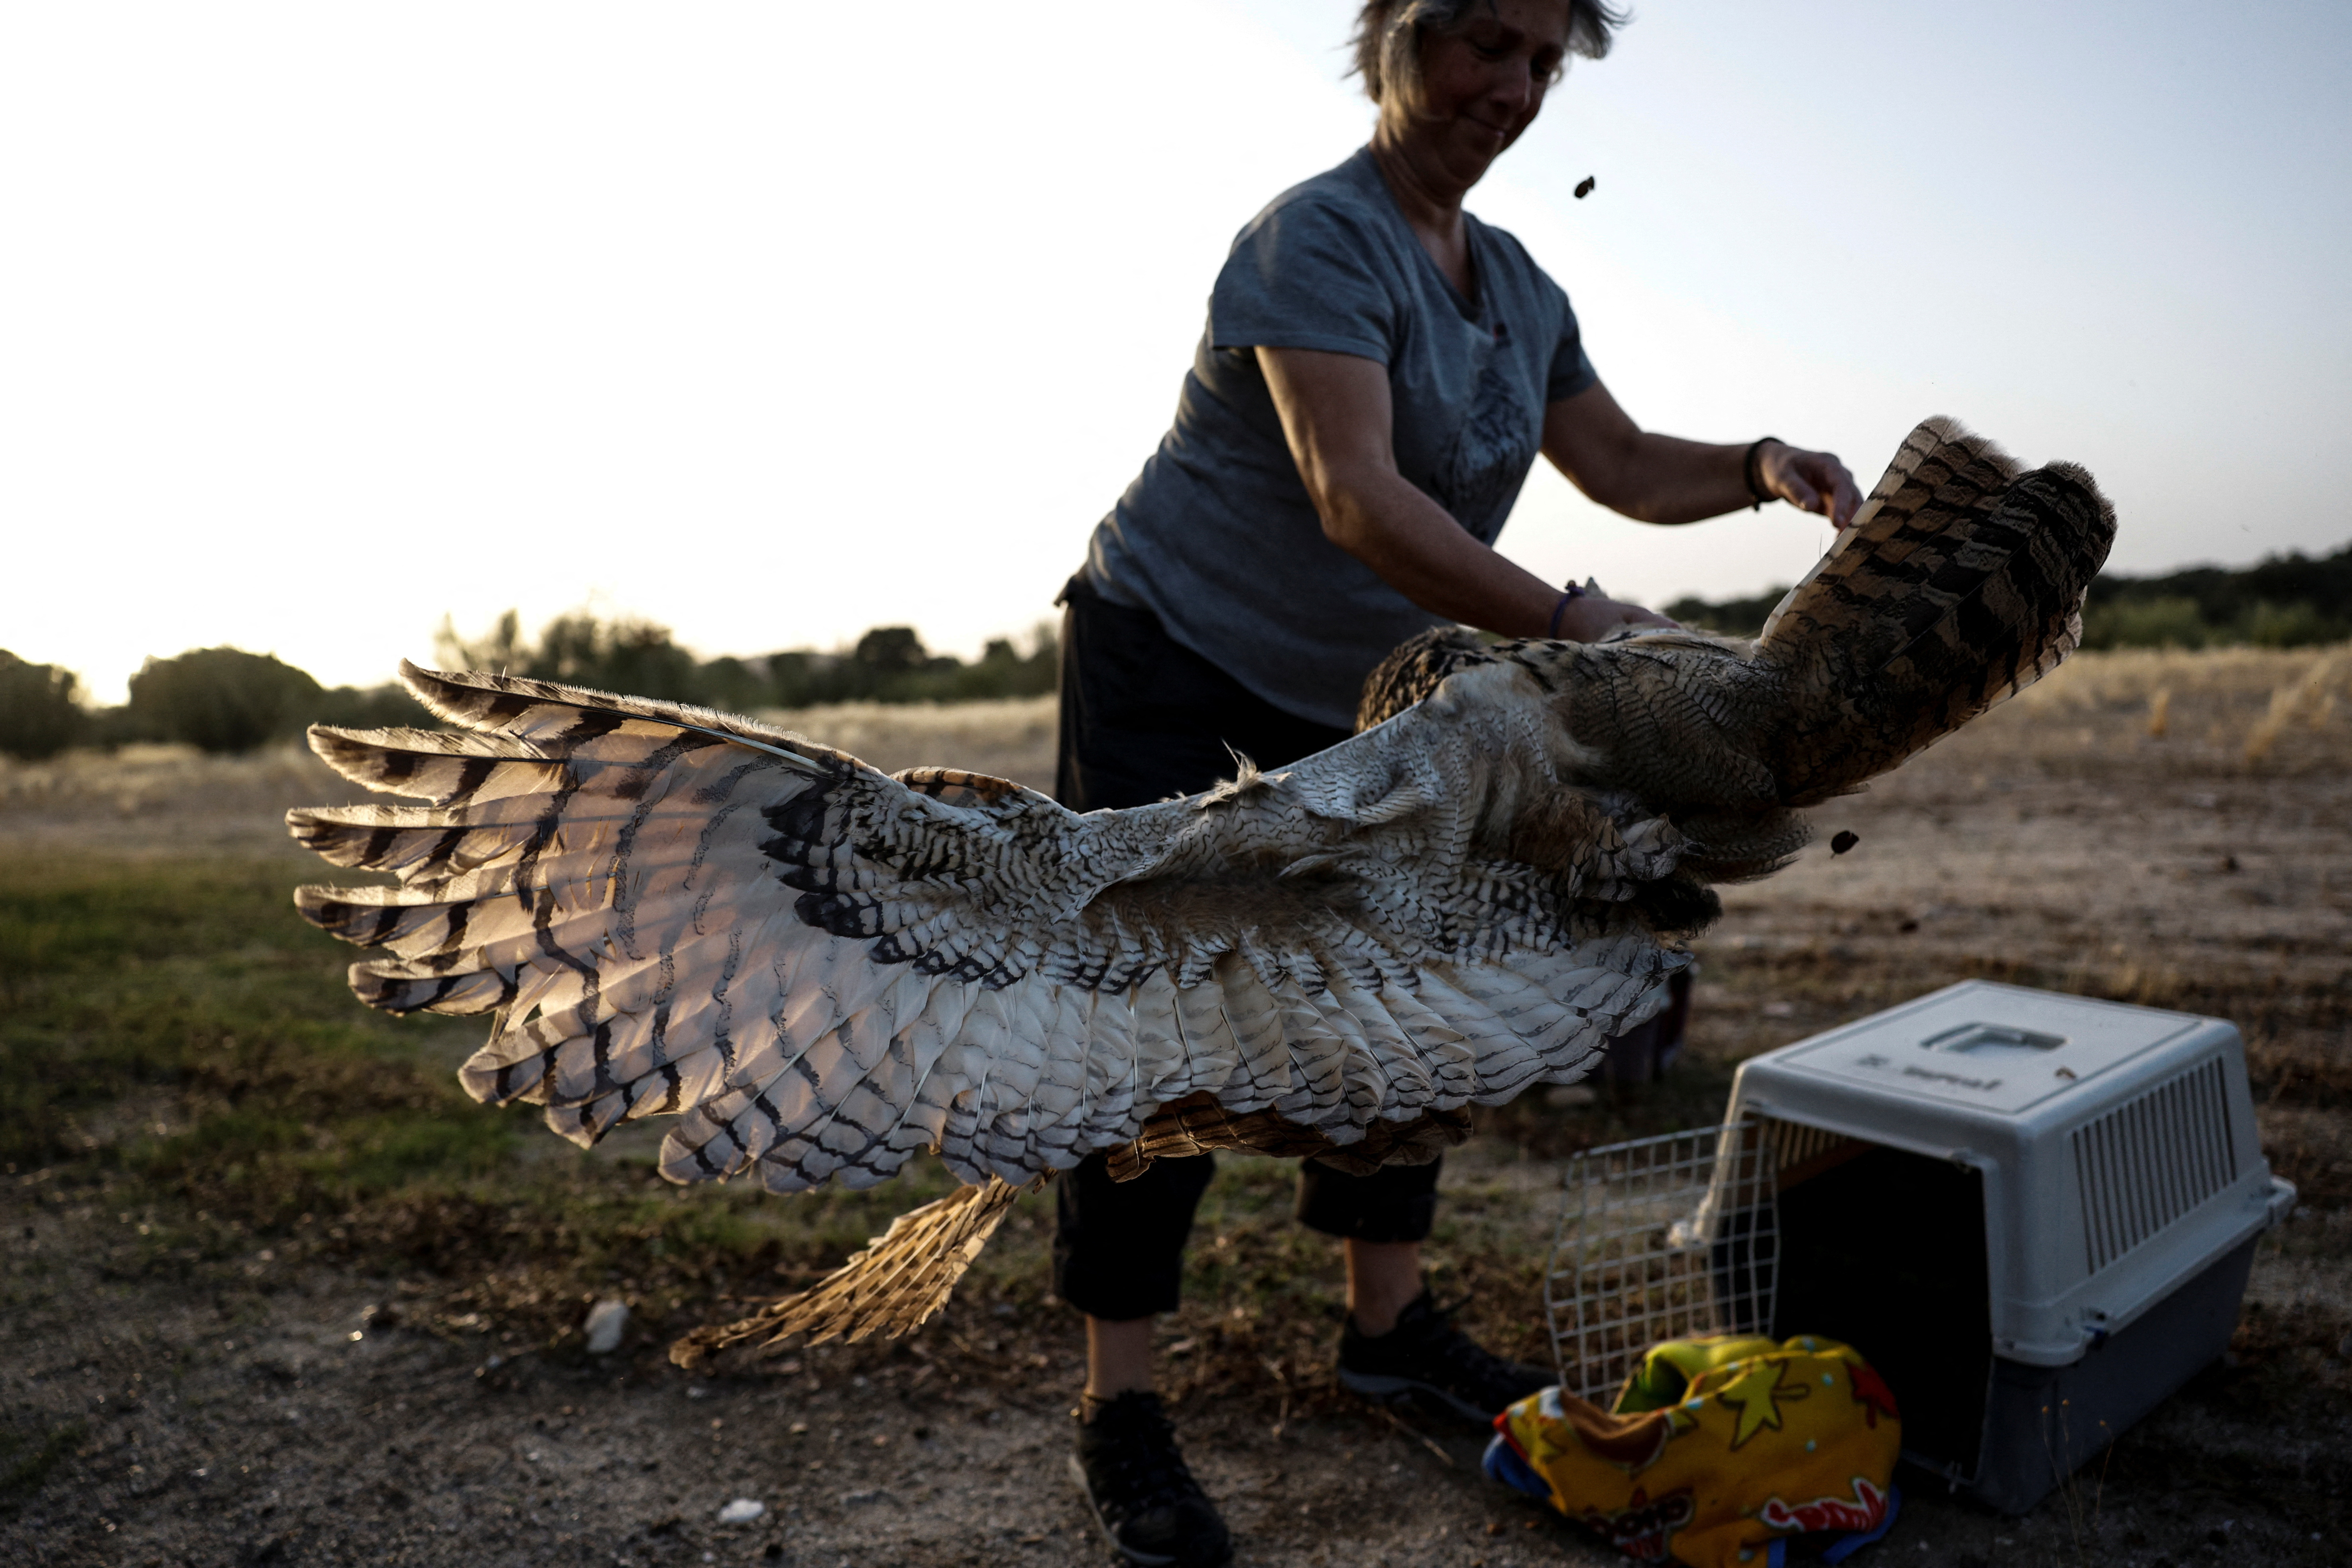 After Years in Captivity, These Rescued Harpy Eagles Are